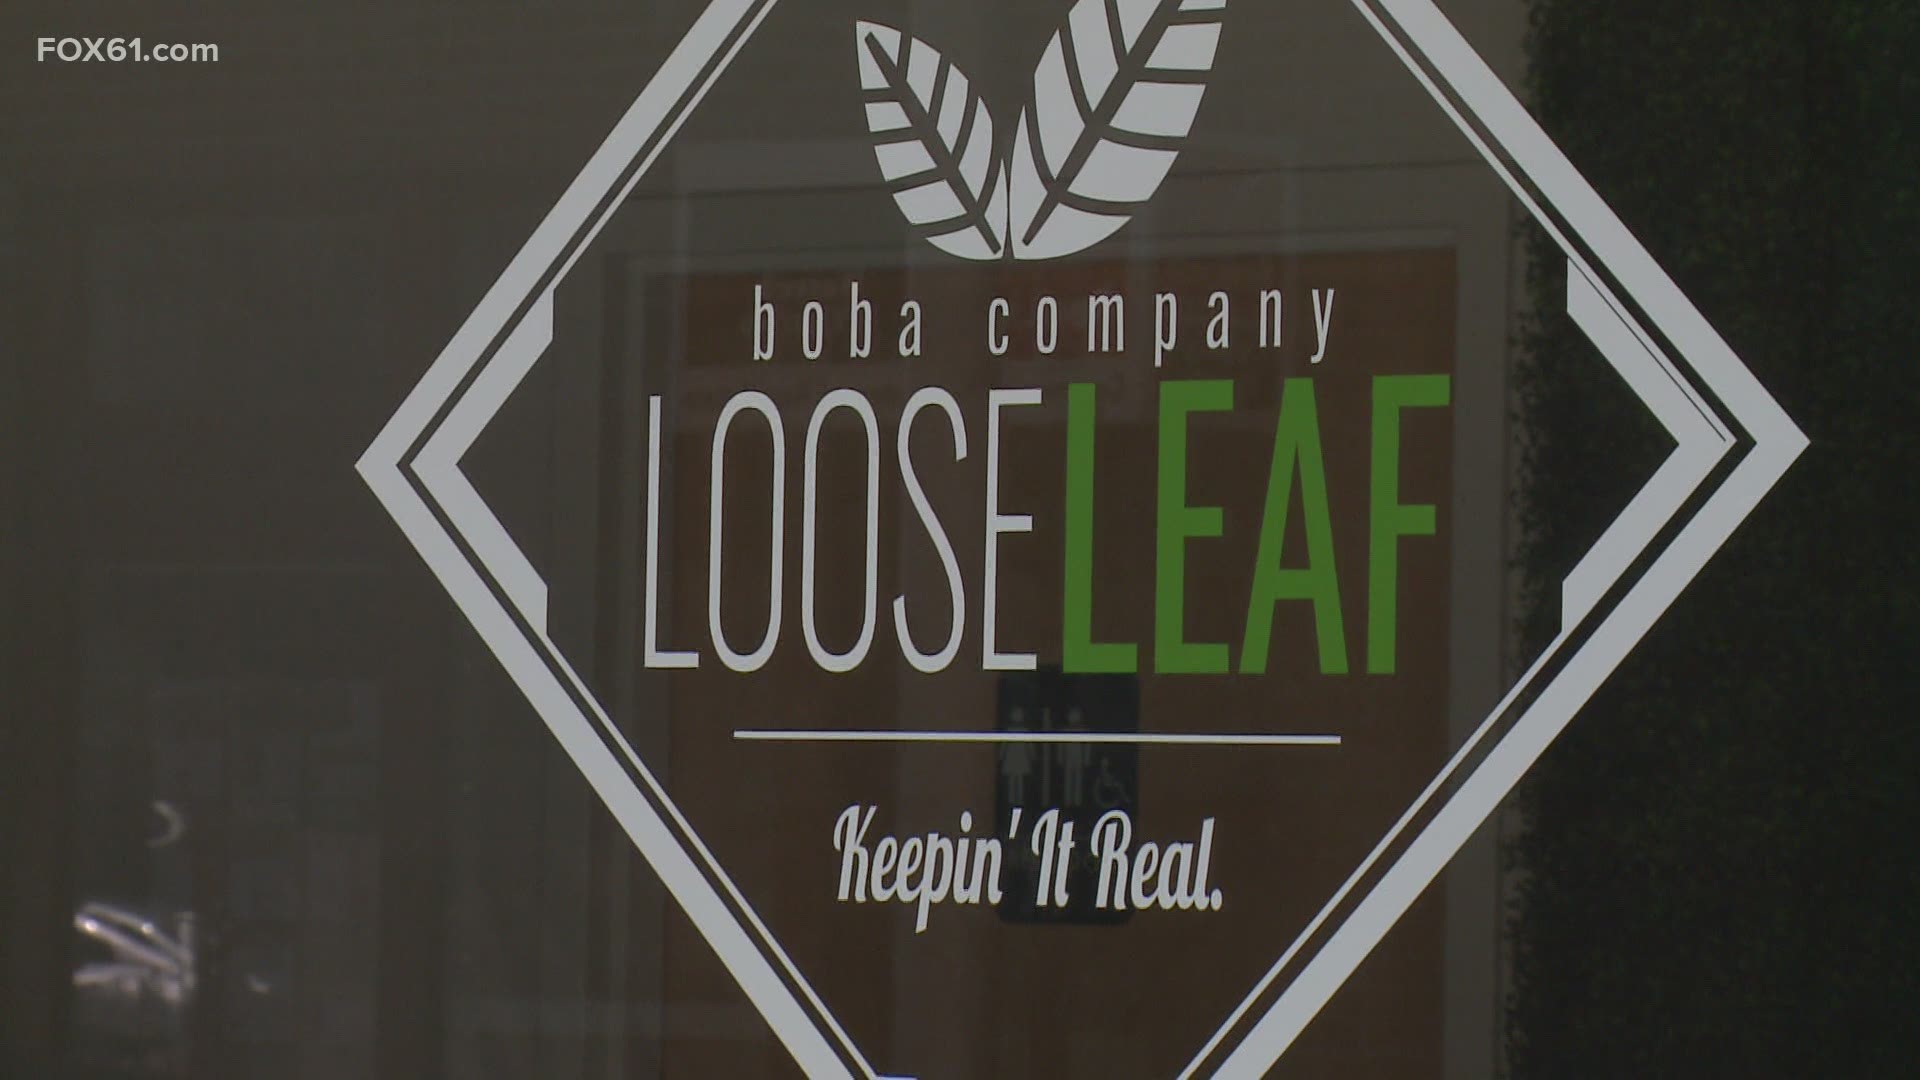 The Shops at Yale introduces a new business called Loose Leaf Boba Company at 46 High Street.